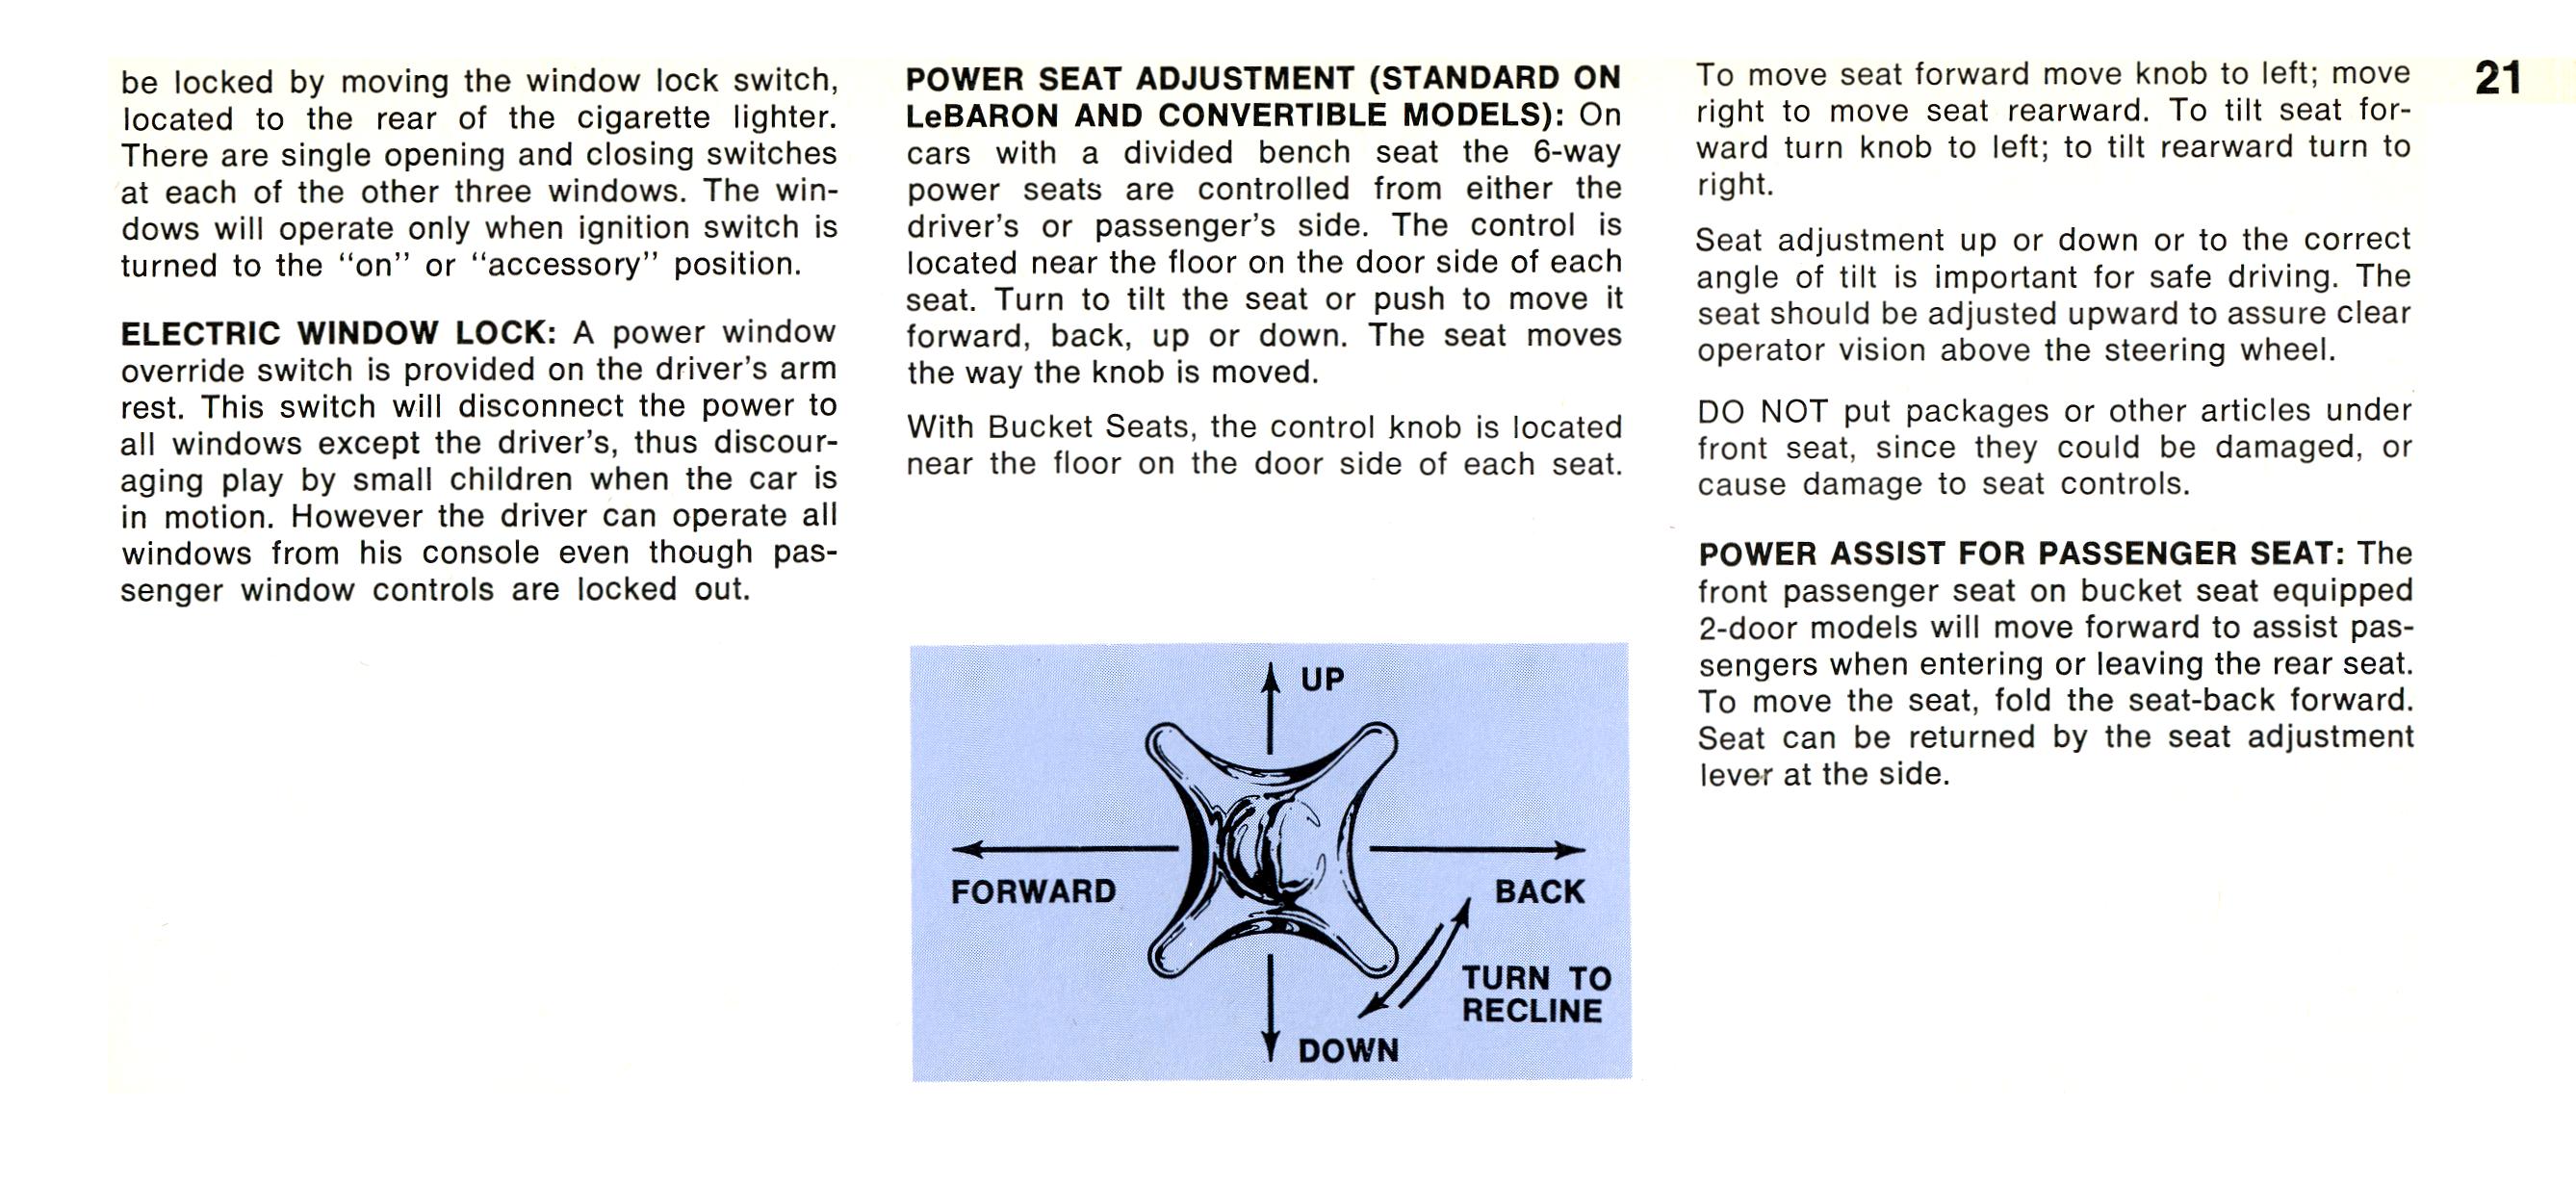 1968 Chrysler Imperial Owners Manual Page 18